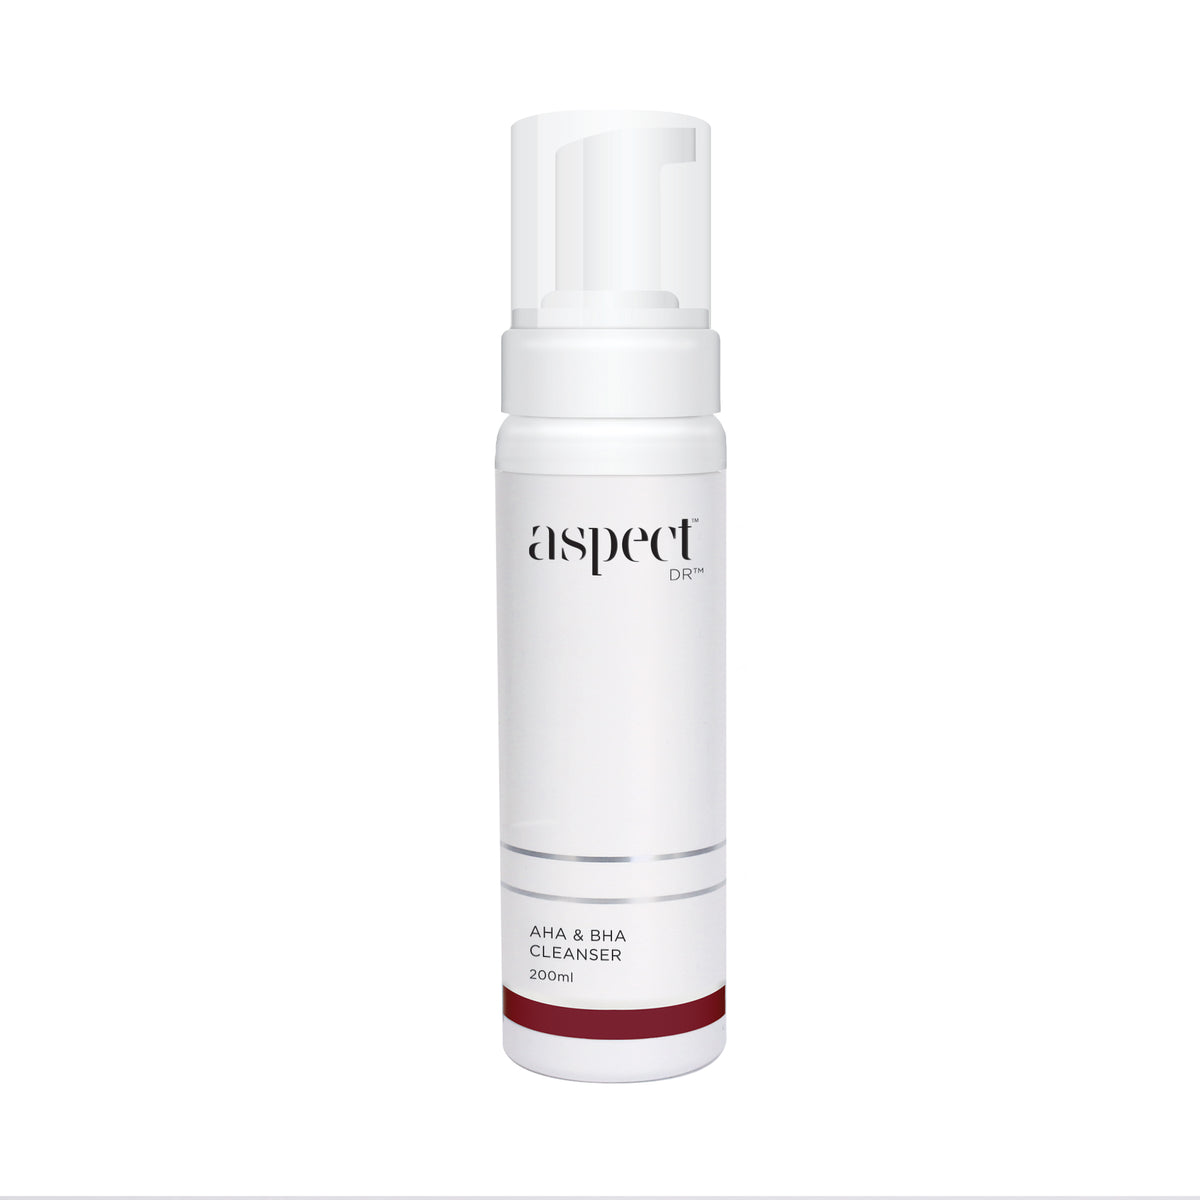 Aspect Dr AHA BHA Foaming Cleanser 200ml - Exquisite Laser Clinic 